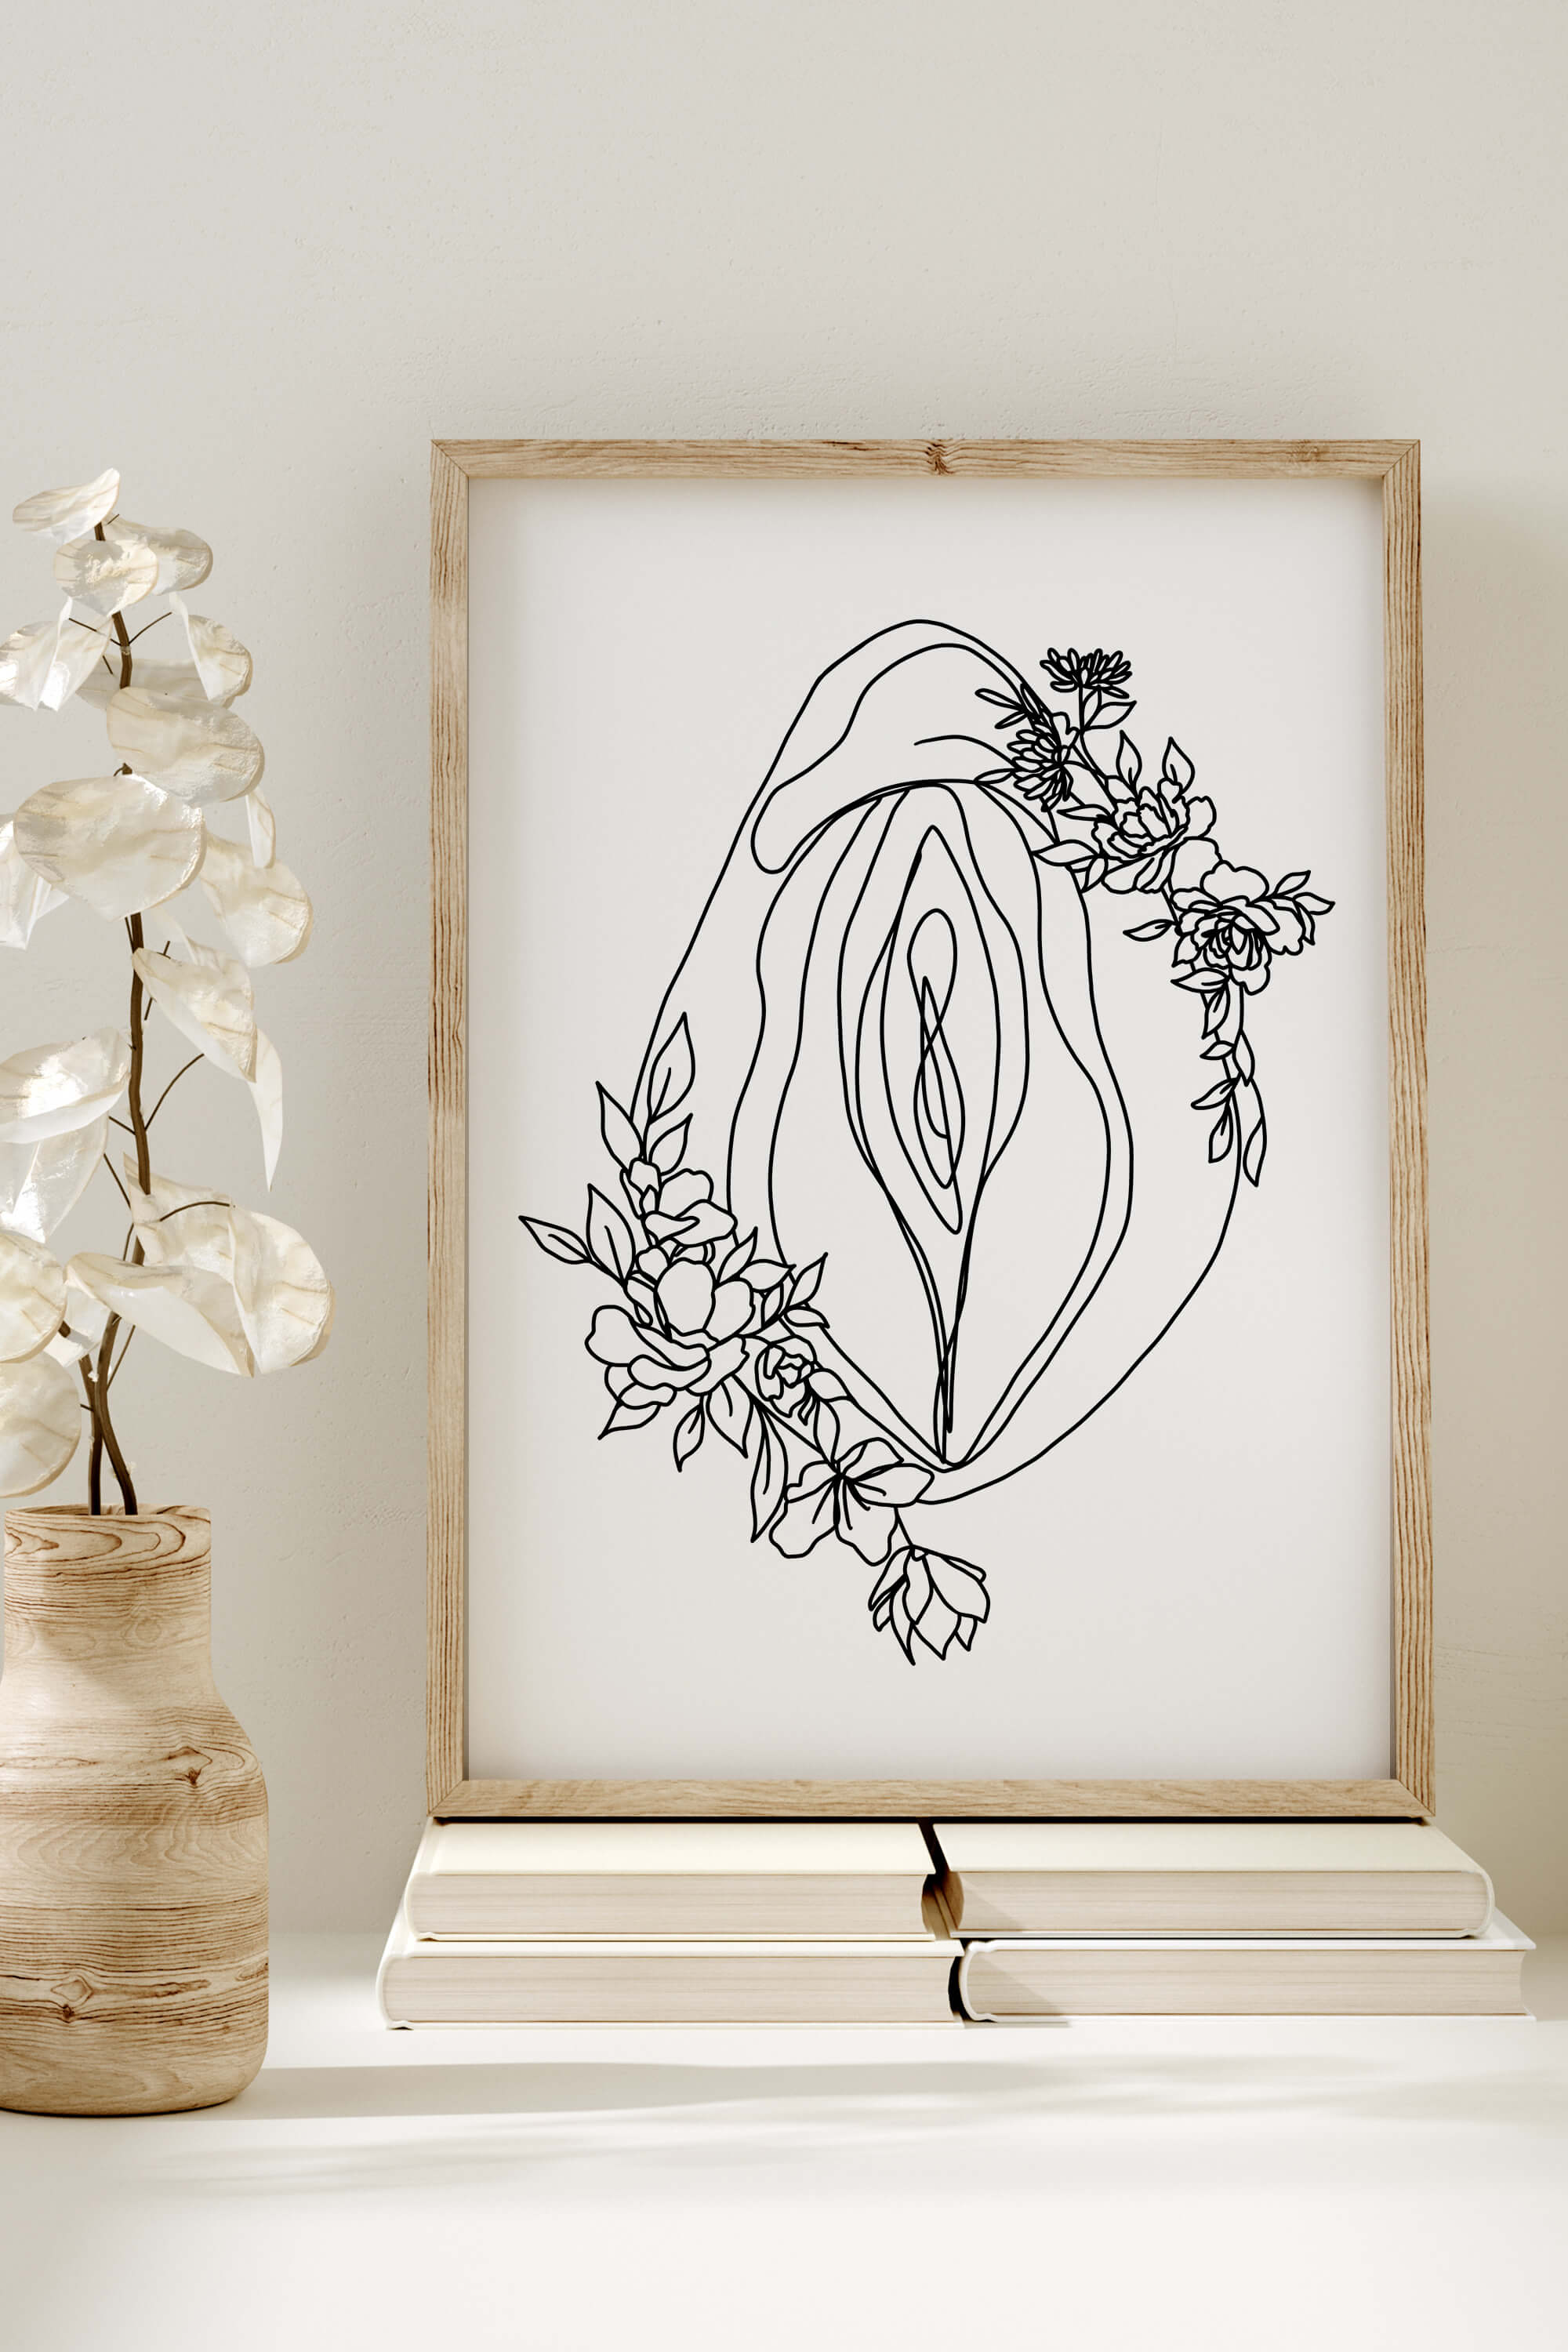 Minimalist art print for wall decor, featuring a monochrome floral vagina design. The simplicity of the lines adds a modern touch, creating an empowering atmosphere. Perfect for those who appreciate contemporary feminist art.